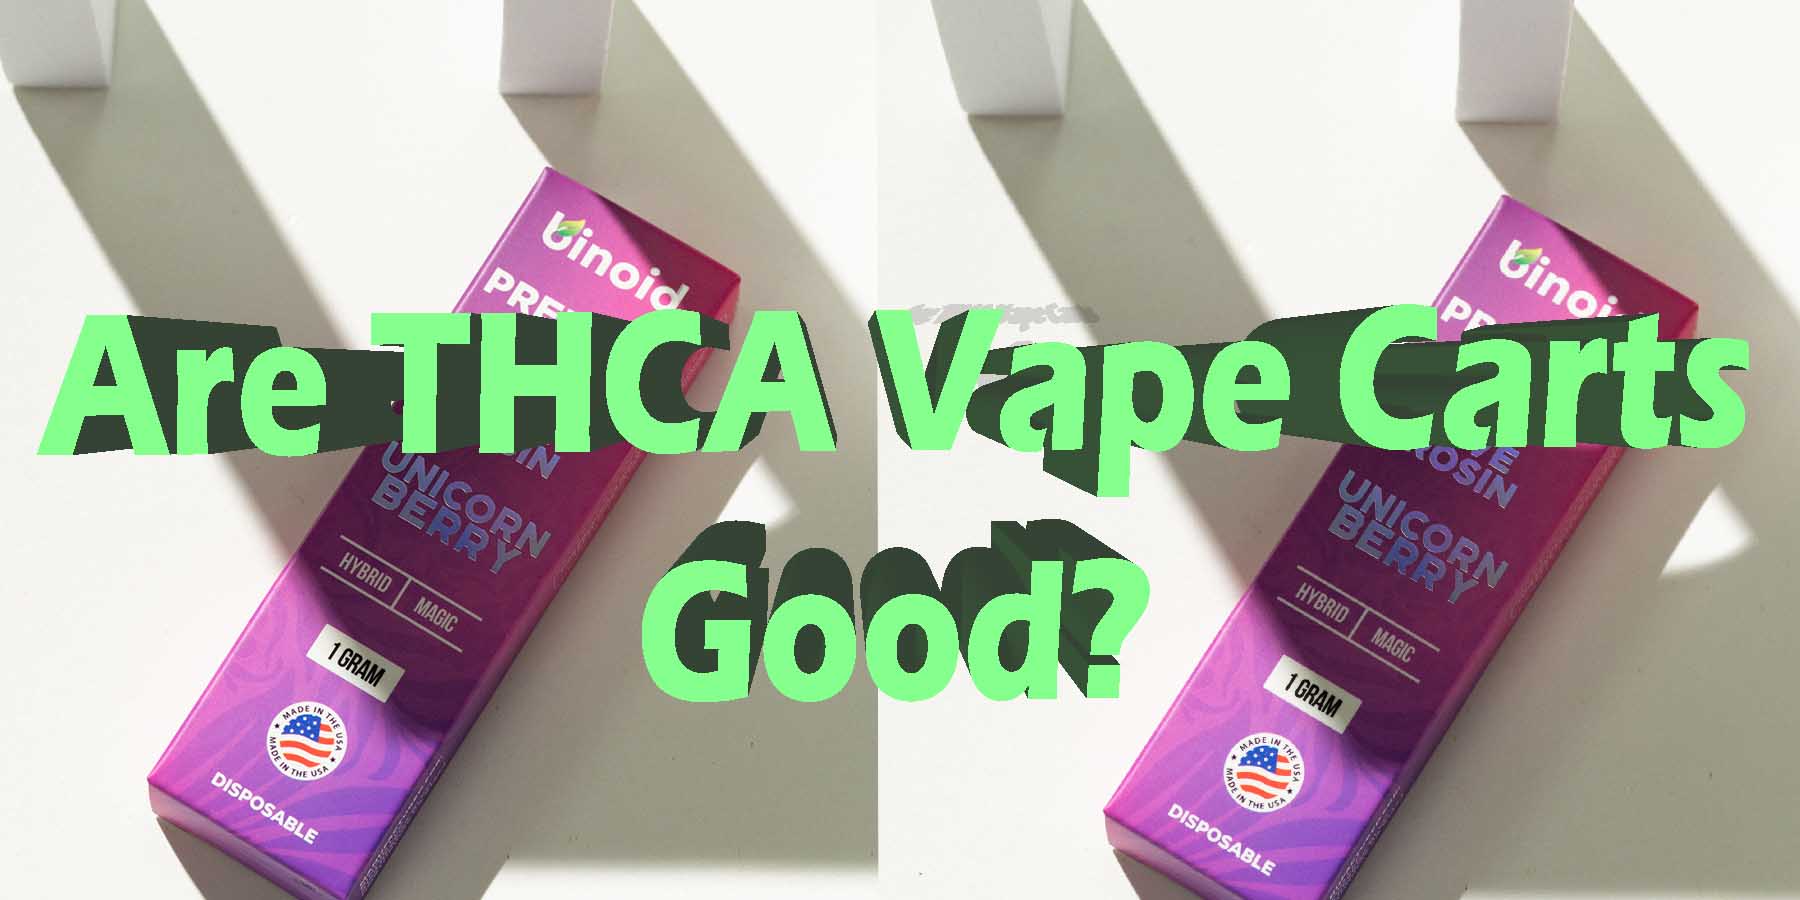 Are THCA Vape Carts Good Disposables WhereToGet HowToGetNearMe BestPlace LowestPrice Coupon Discount For Smoking Best High Smoke Shop Online Near Me StrongestBrand BestBrand Binoid Bloomz